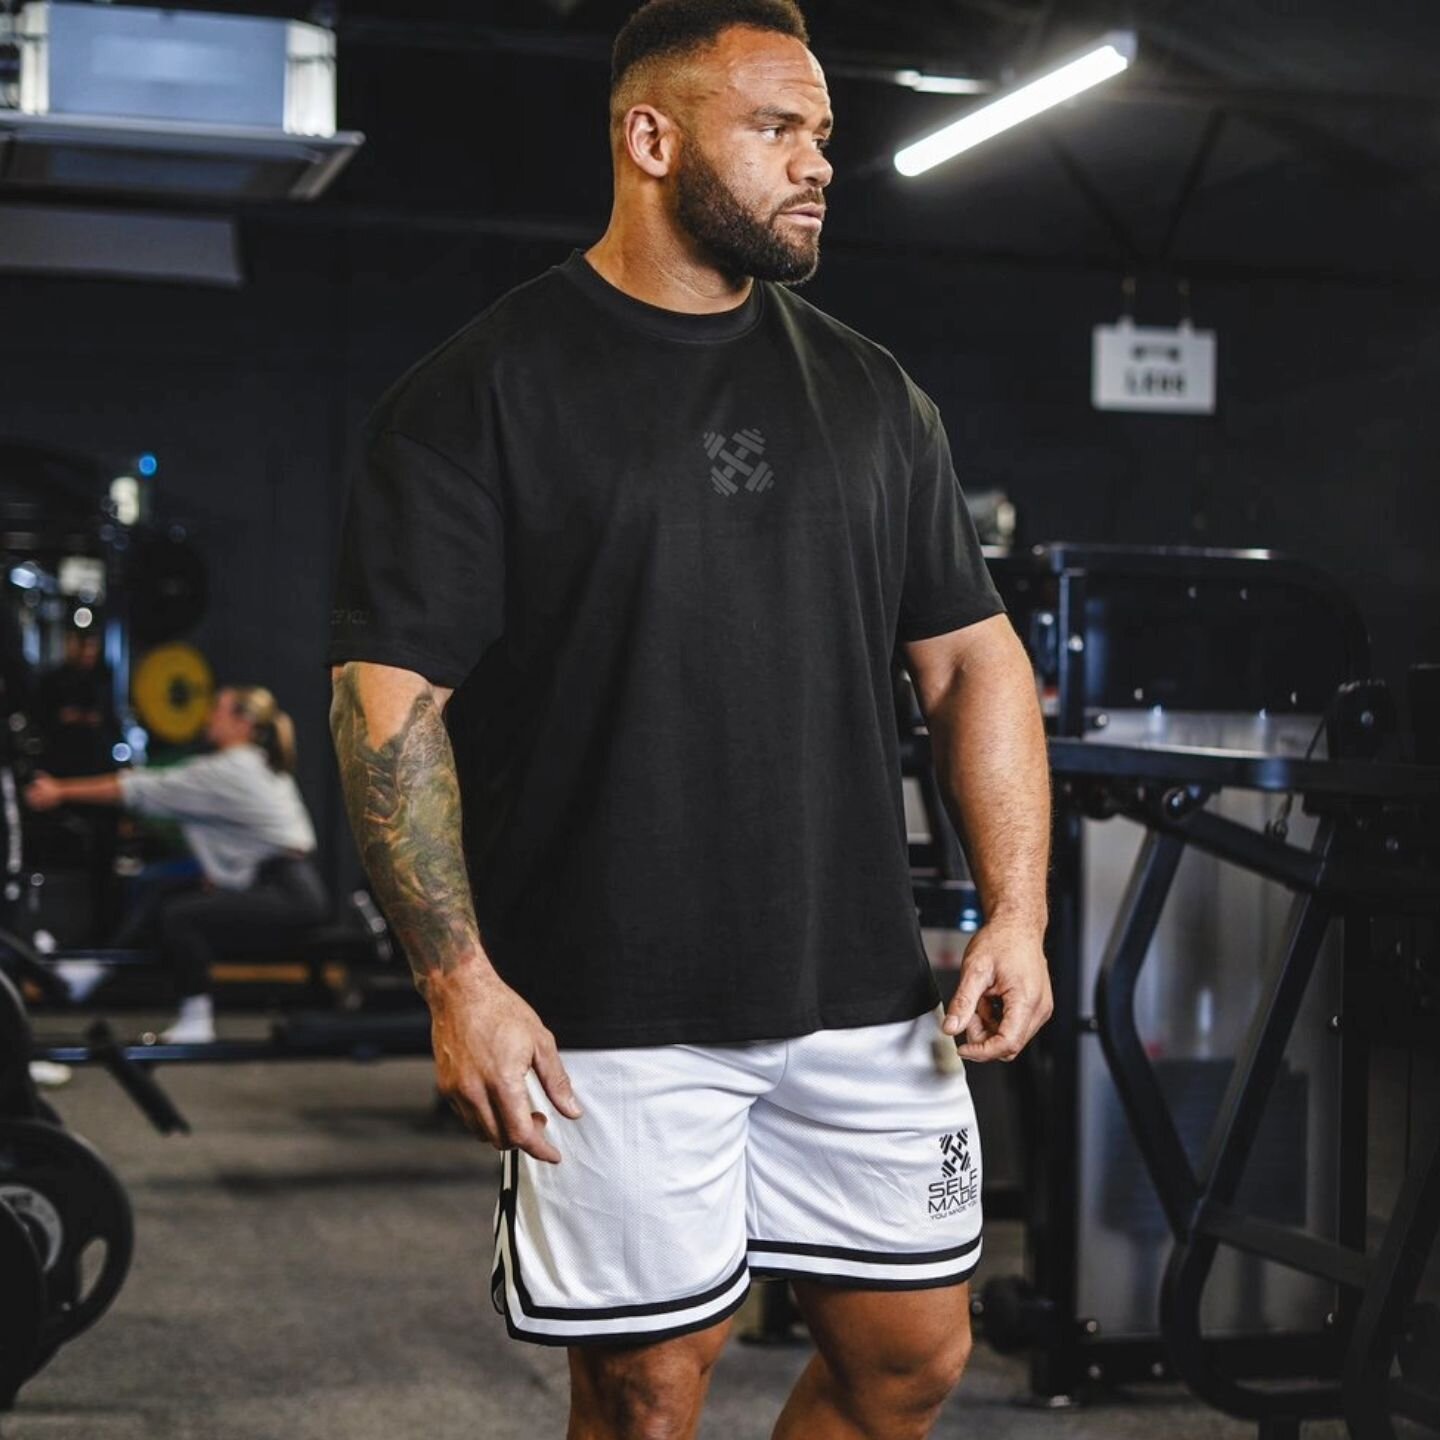 THE PUMP COVER aka OVERSIZED HEAVY TEE

Nobody does it better for that premium feel.

Which one is your favourite? Let us know below ⤵️

Then go buy one!
Self-made-apparel.com 

#pumpcover #oversized #gymwear #youmadeyou